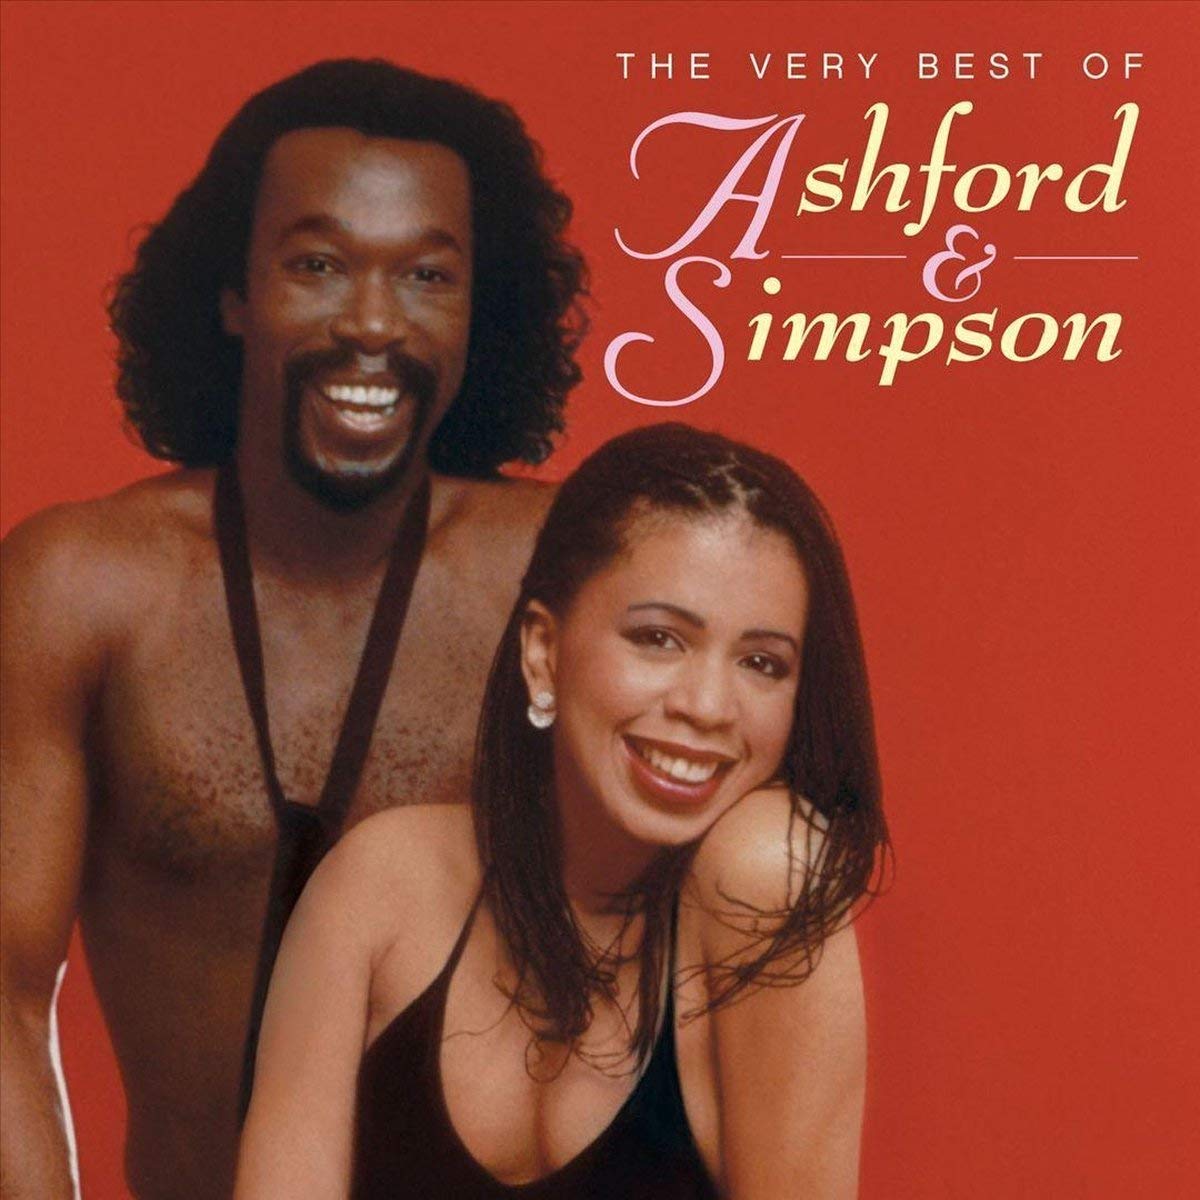 Art for Love Don't Make It Right by Ashford & Simpson